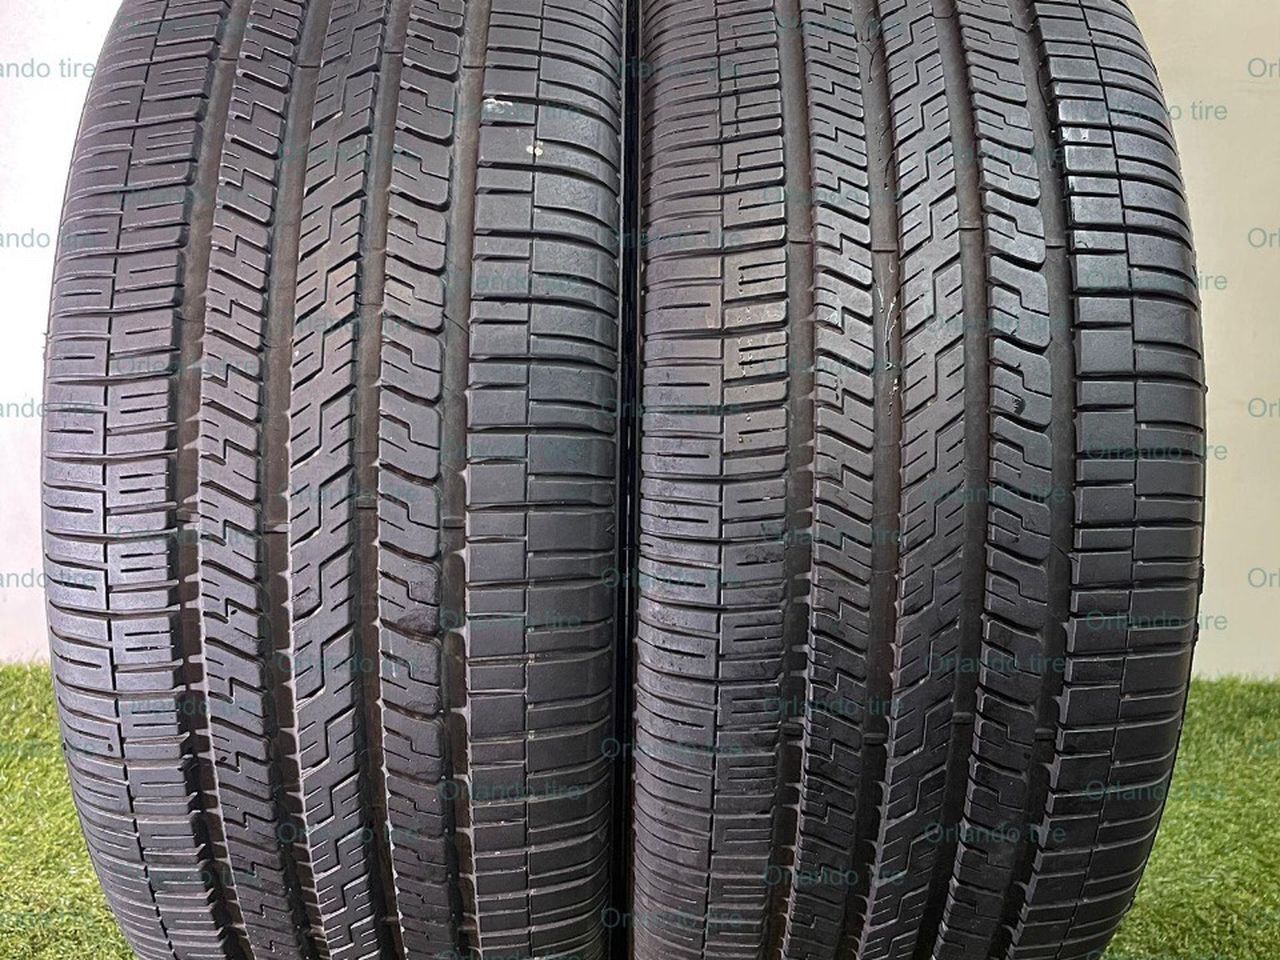 D149  245 45 20 99Y  Goodyear  2 Used Tires 90% Life 